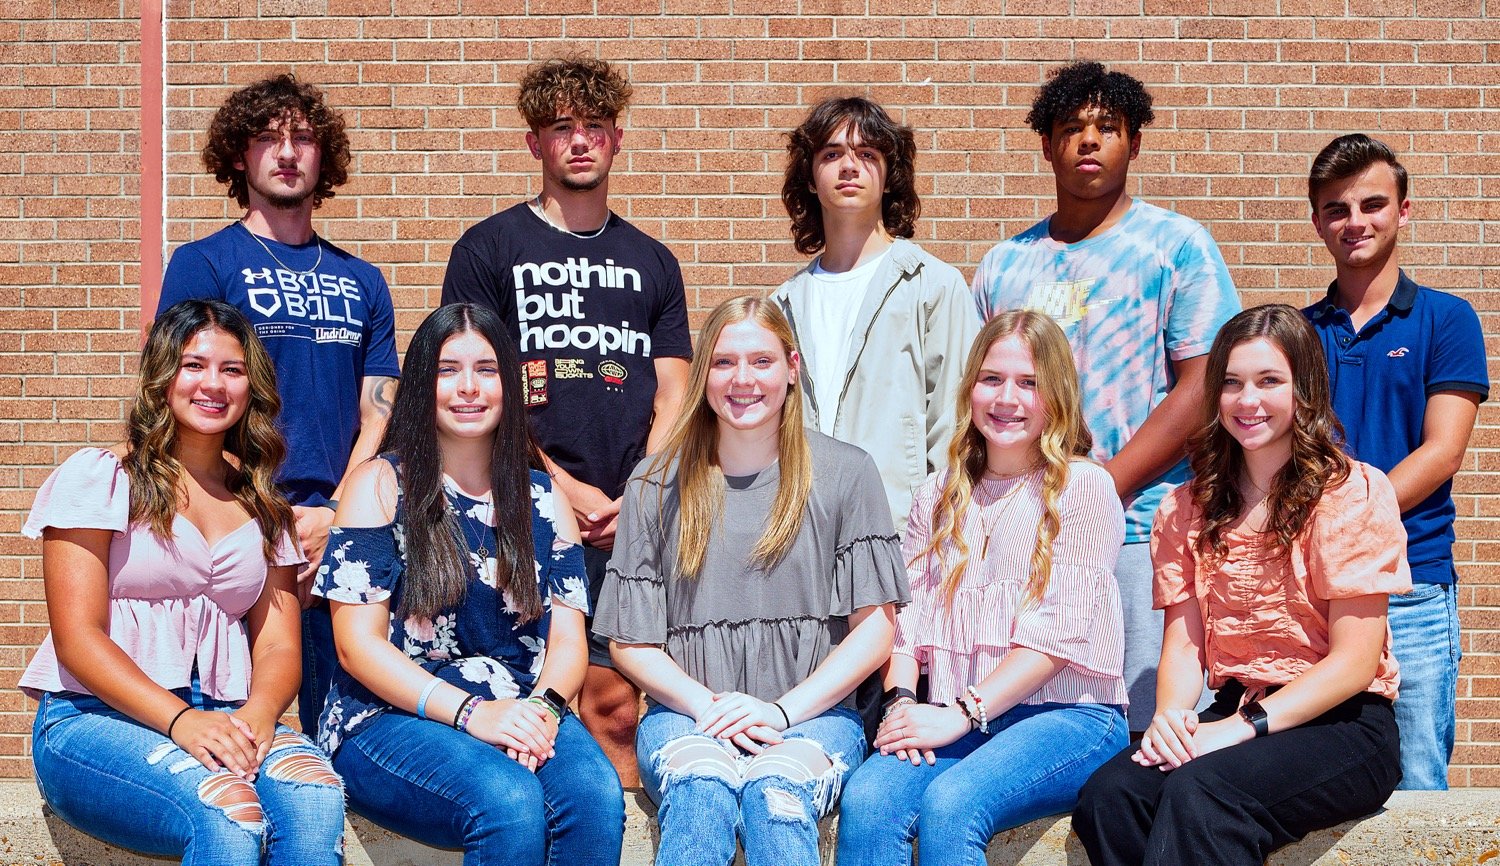 Nominated for Mineola homecoming king, standing from left to right, are seniors Kaden Bell, T.J. Moreland, Preston Radla, Isaiah Gardner and Cameron Bussell. The seated nominees for queen, left to right, are Kloey Garcia, Aliyan Gonzales, Mylee Fischer, Carrie Littlefield and Allison Hooton.